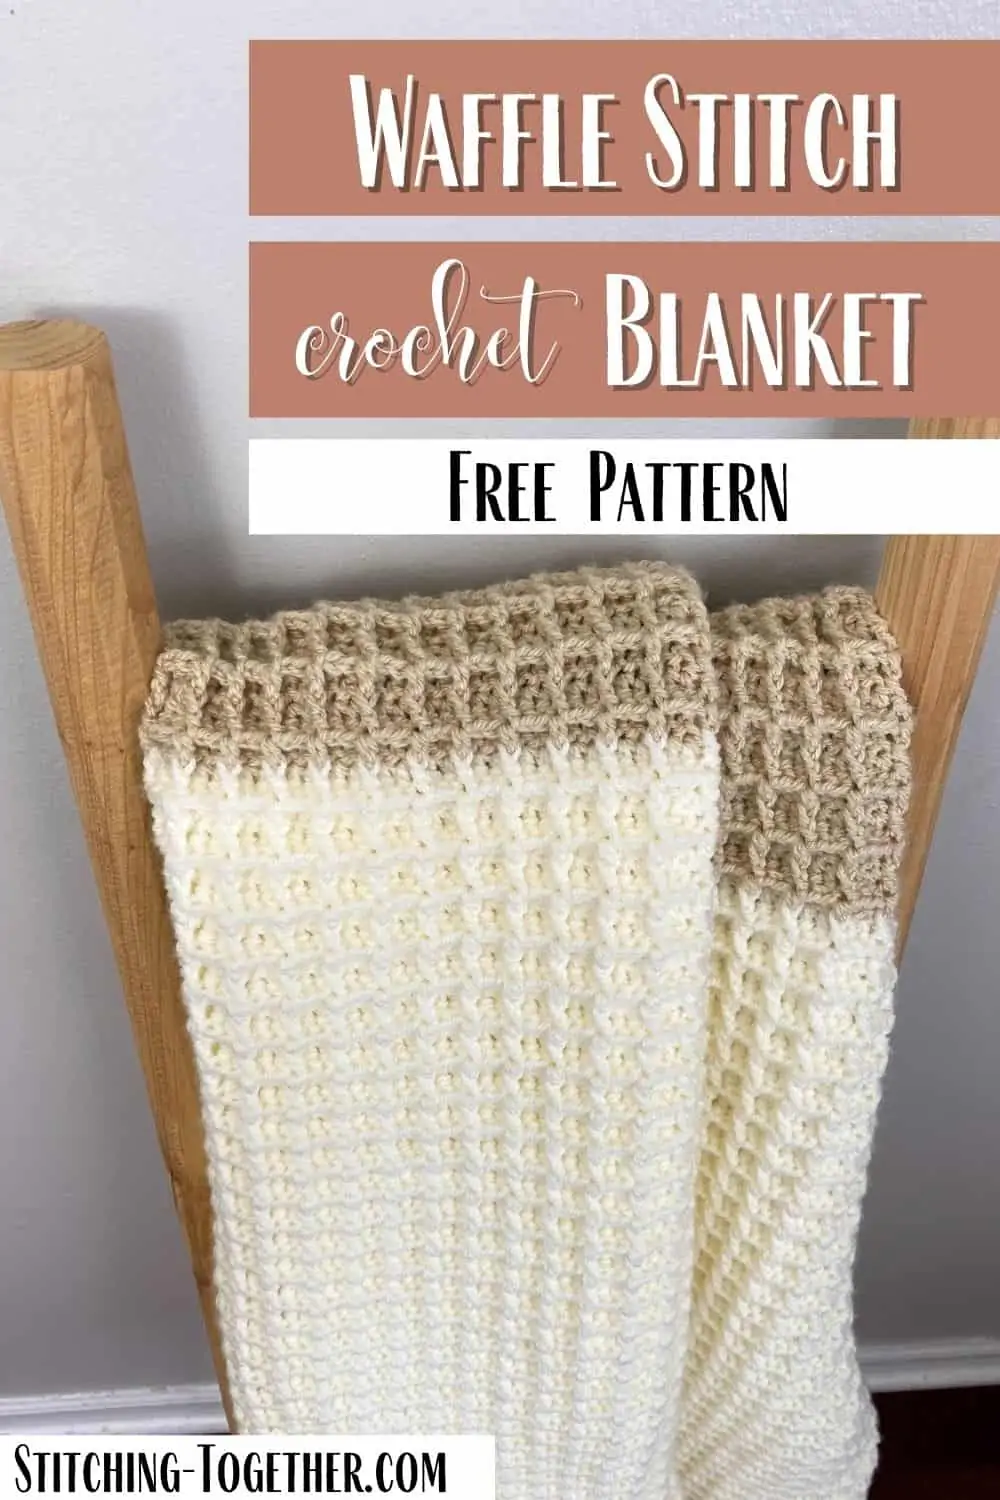 graphic with waffle stitch blanket hanging on ladder and text reading: "waffle stitch crochet blanket free pattern"